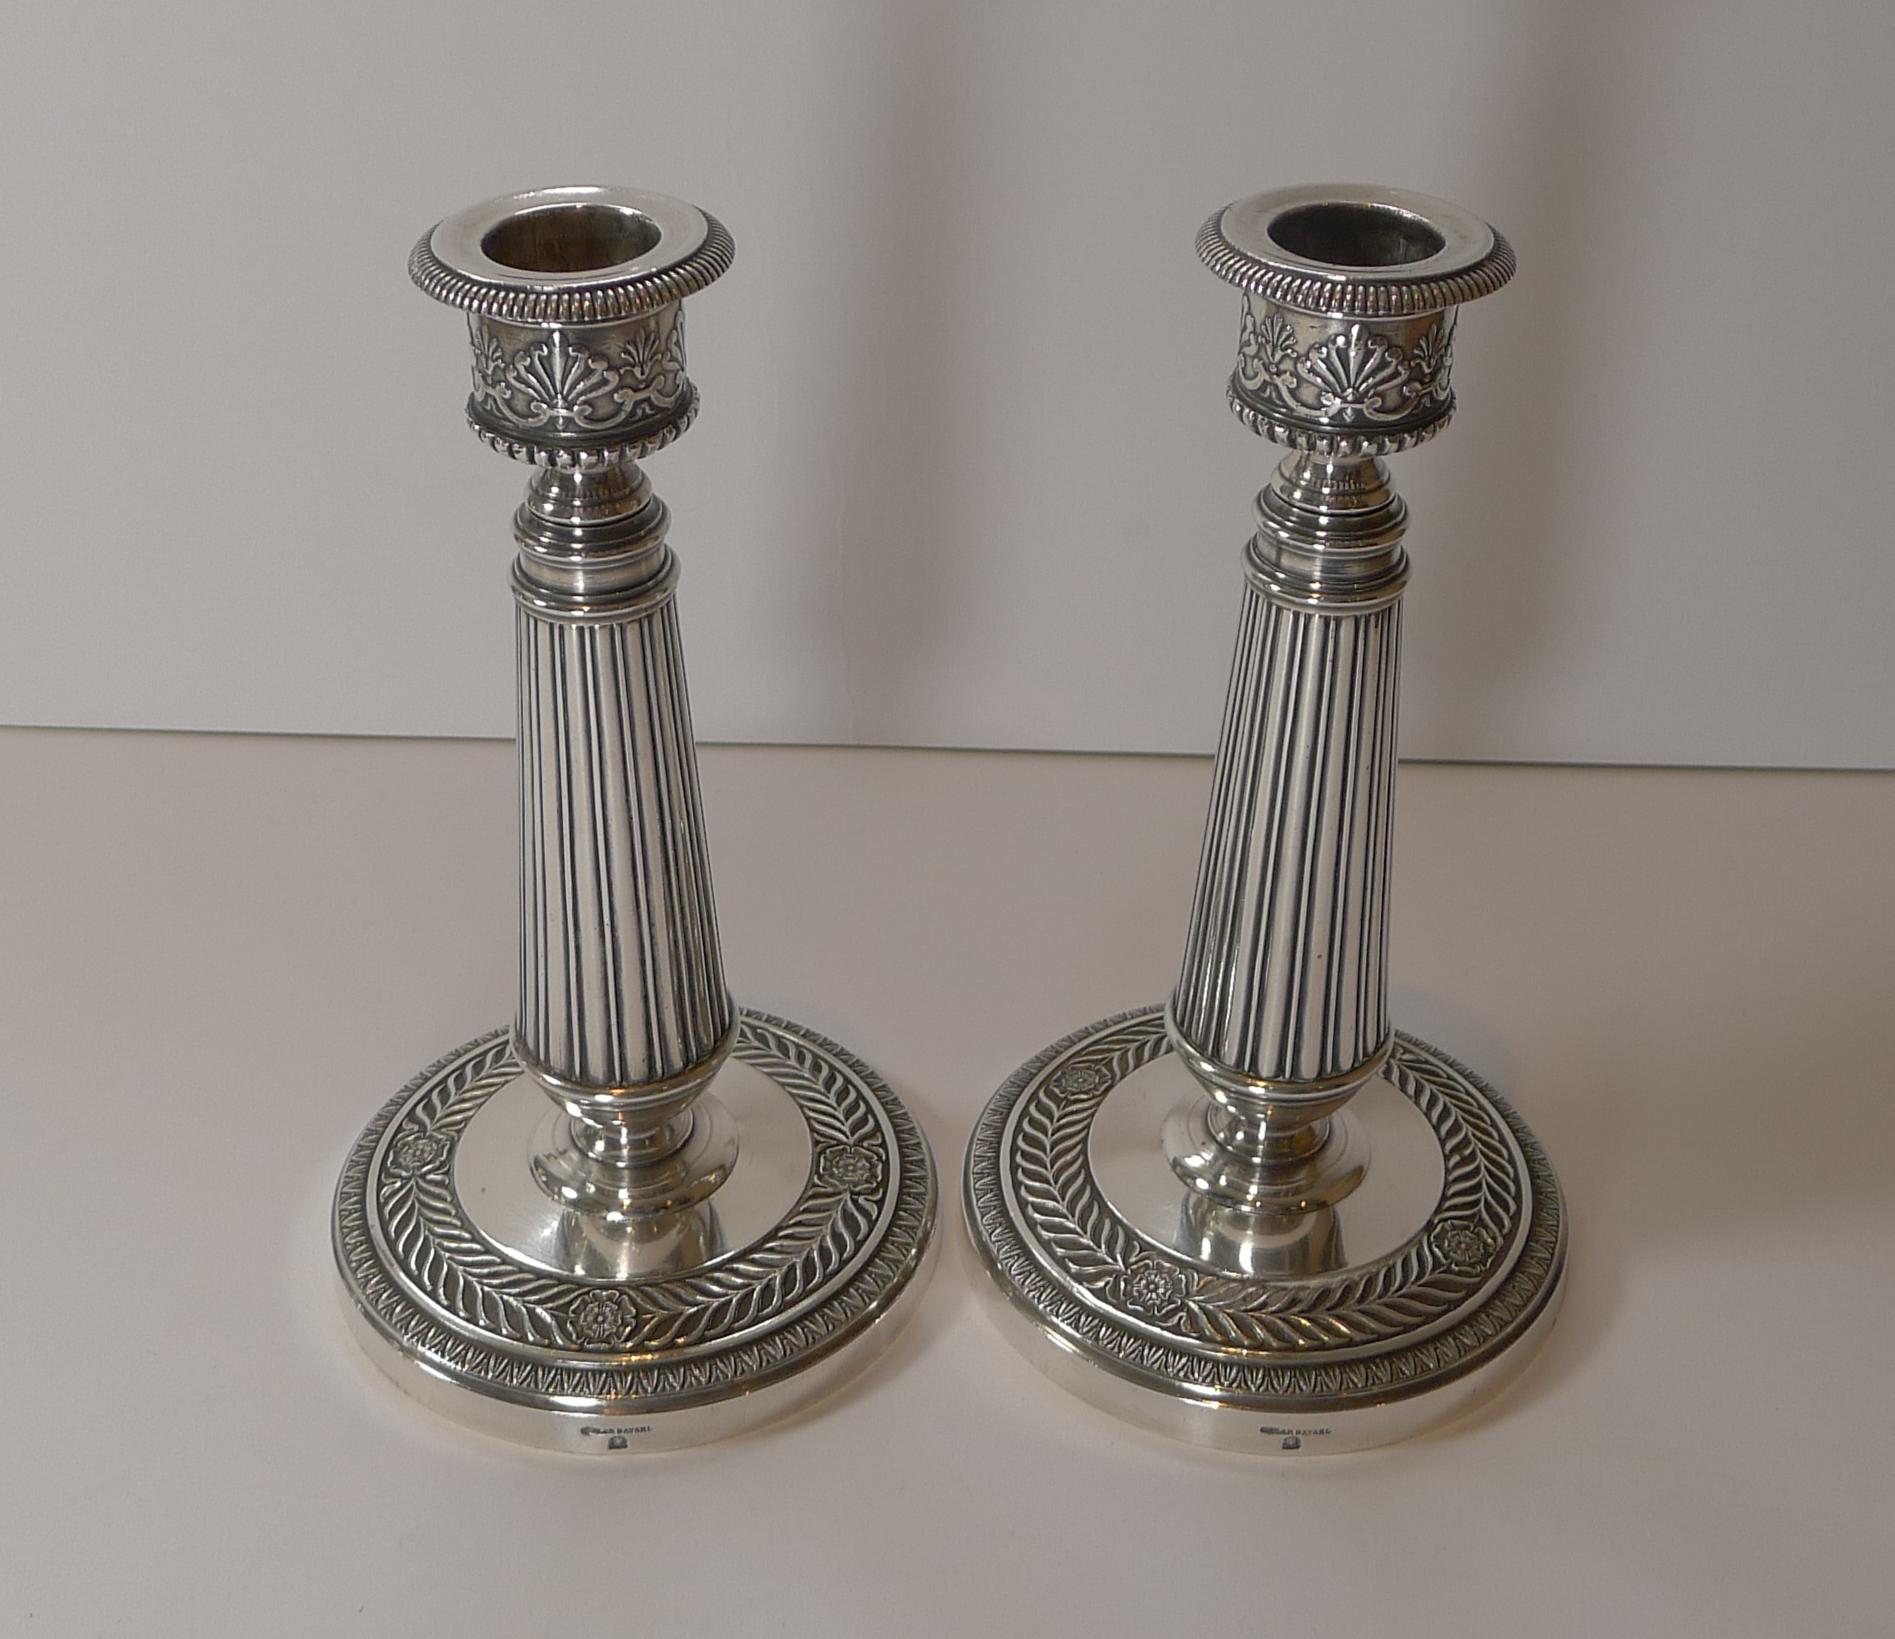 A very fine pair of small silver plated candlesticks, the perfect size for a desk or mantlepiece. Made around 1890/1900 in Paris by the top-notch silversmith, Cailar Bayard. 

Cailar & Bayard, 37 rue Grange-aux-Belles, Paris, founded in 1848 by